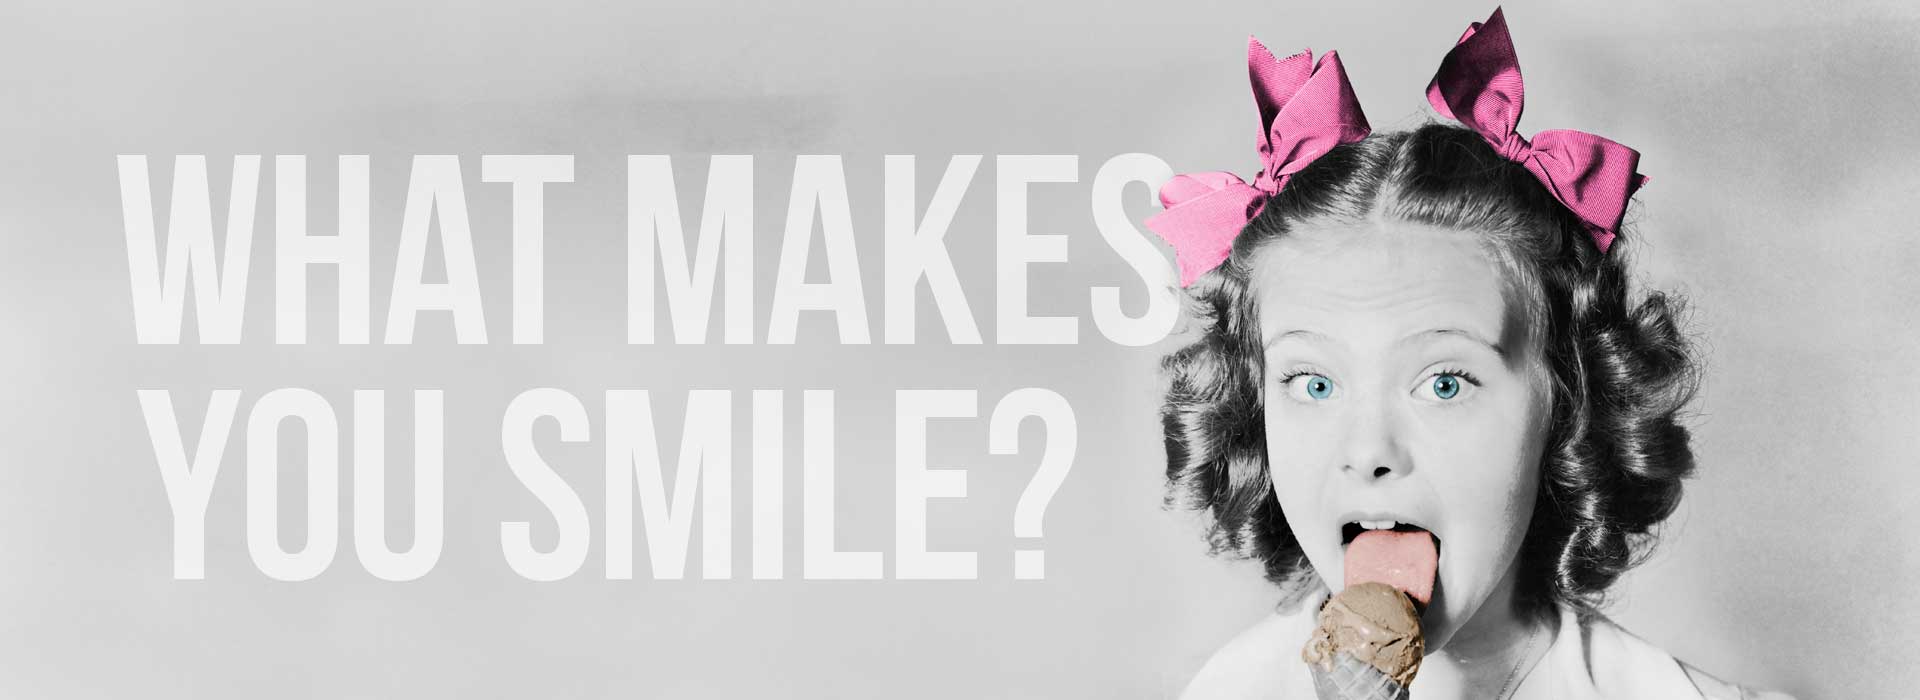 What makes you smile?